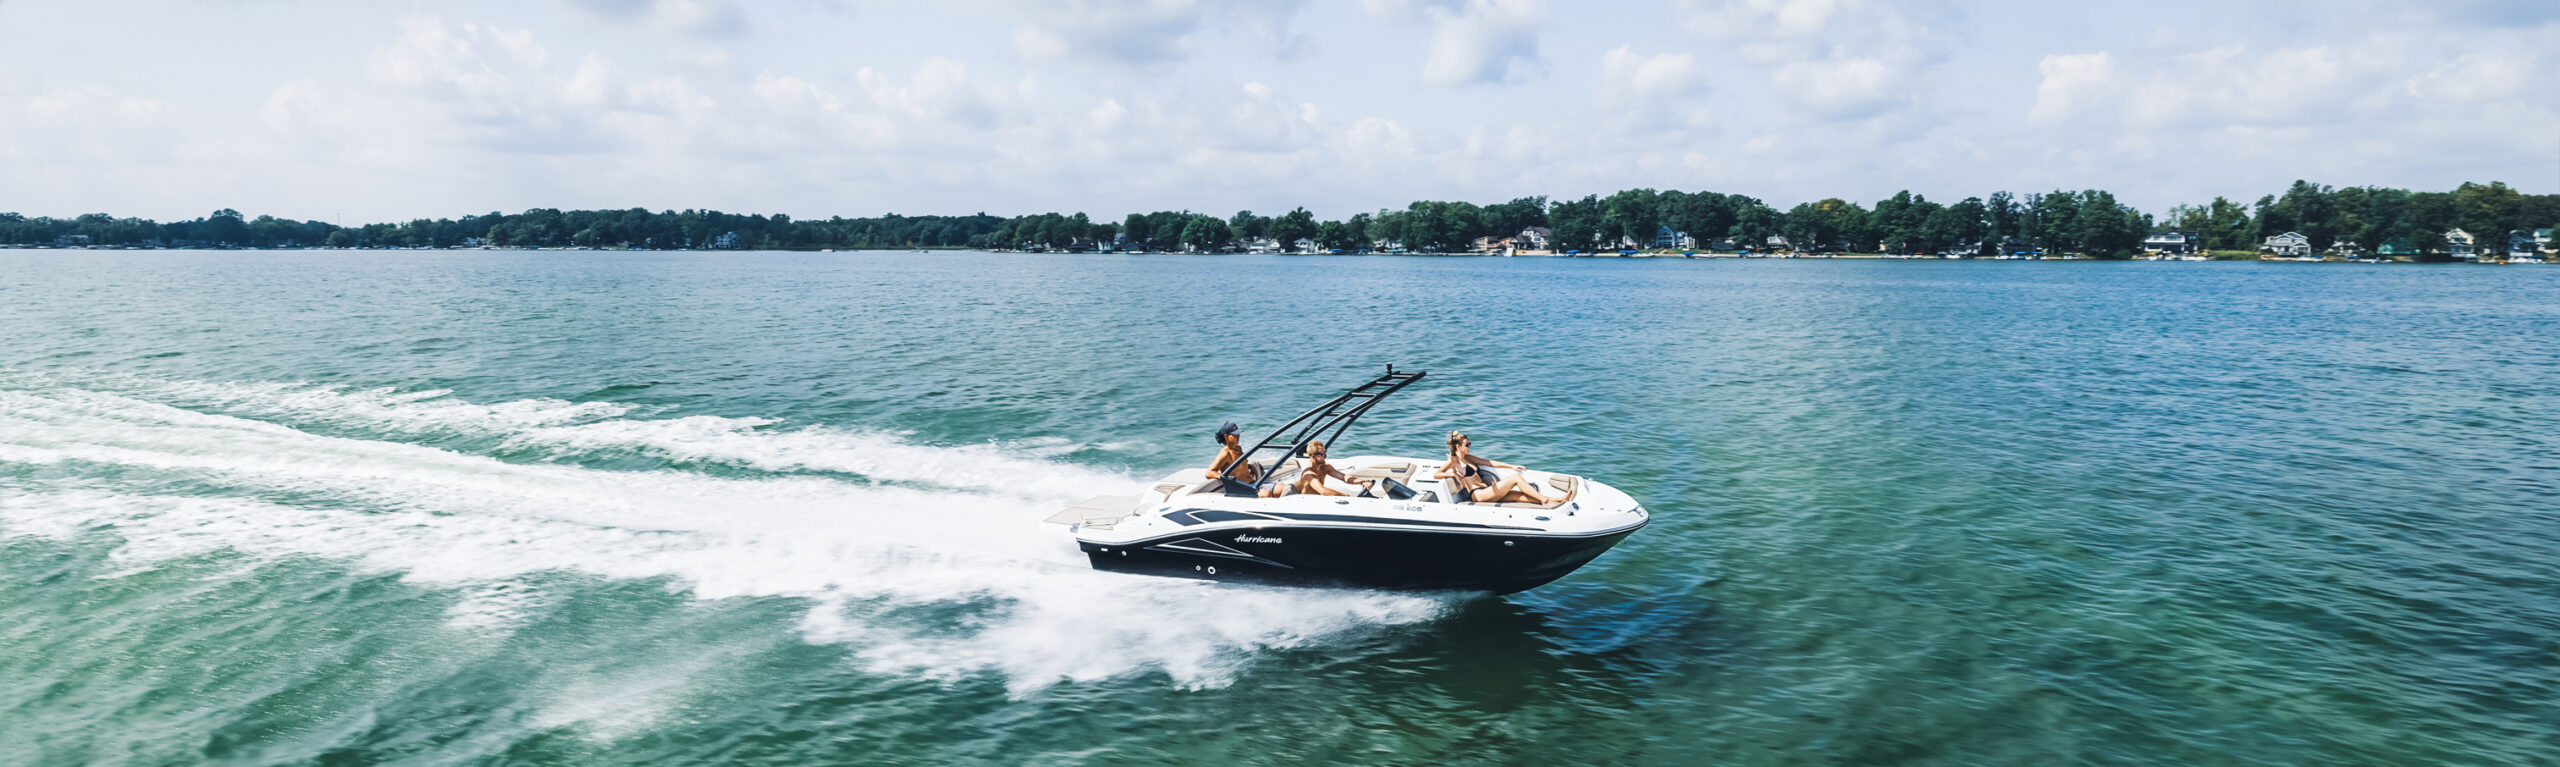 Keowee Marina has state-of-the-art facilities, including a full-service fuel dock, boat storage, and repair services.